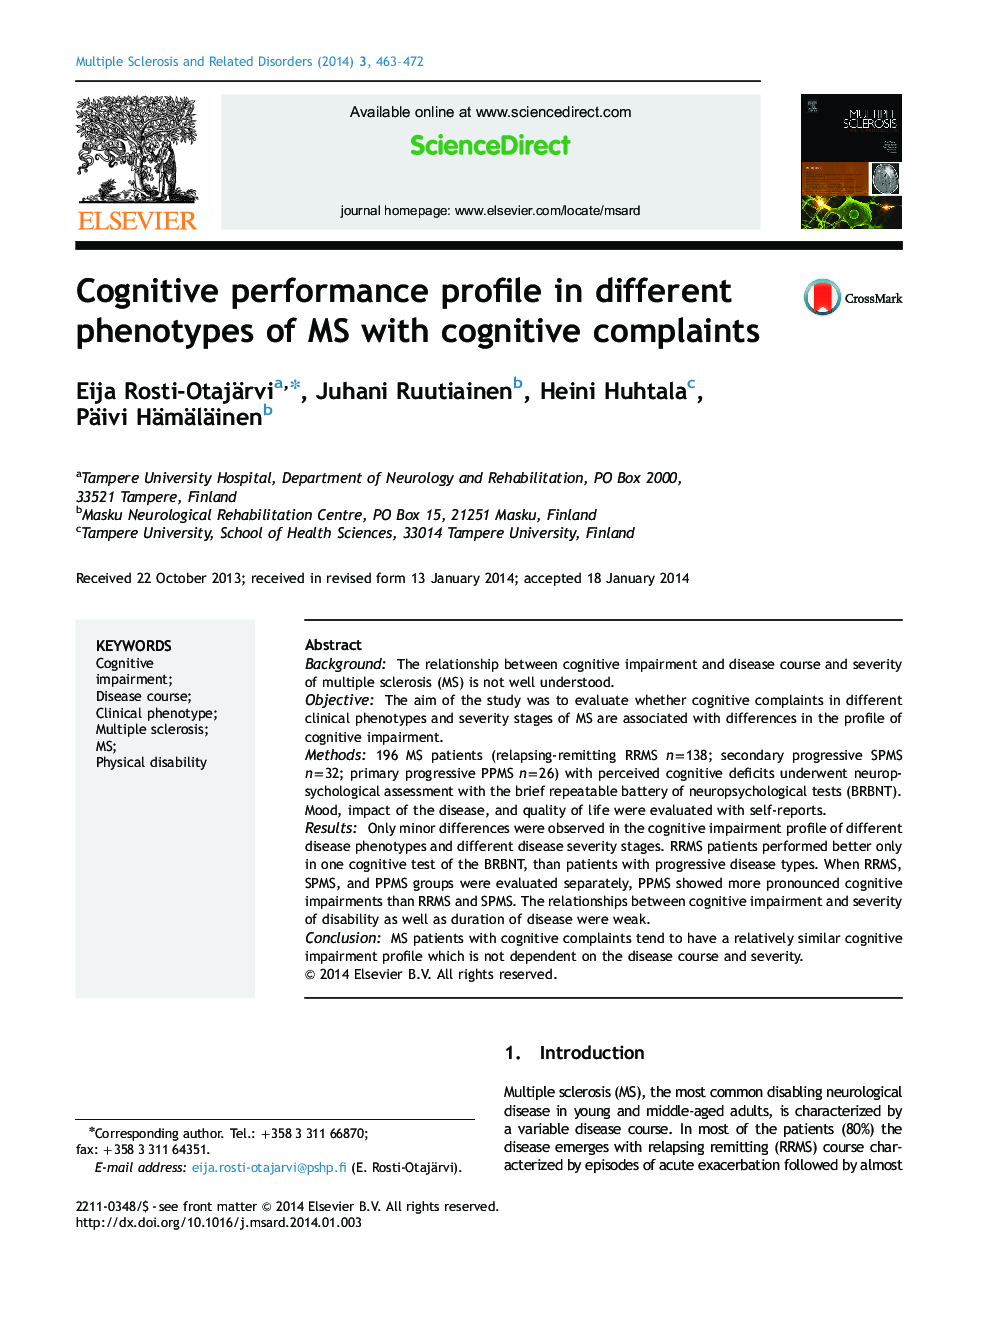 Cognitive performance profile in different phenotypes of MS with cognitive complaints